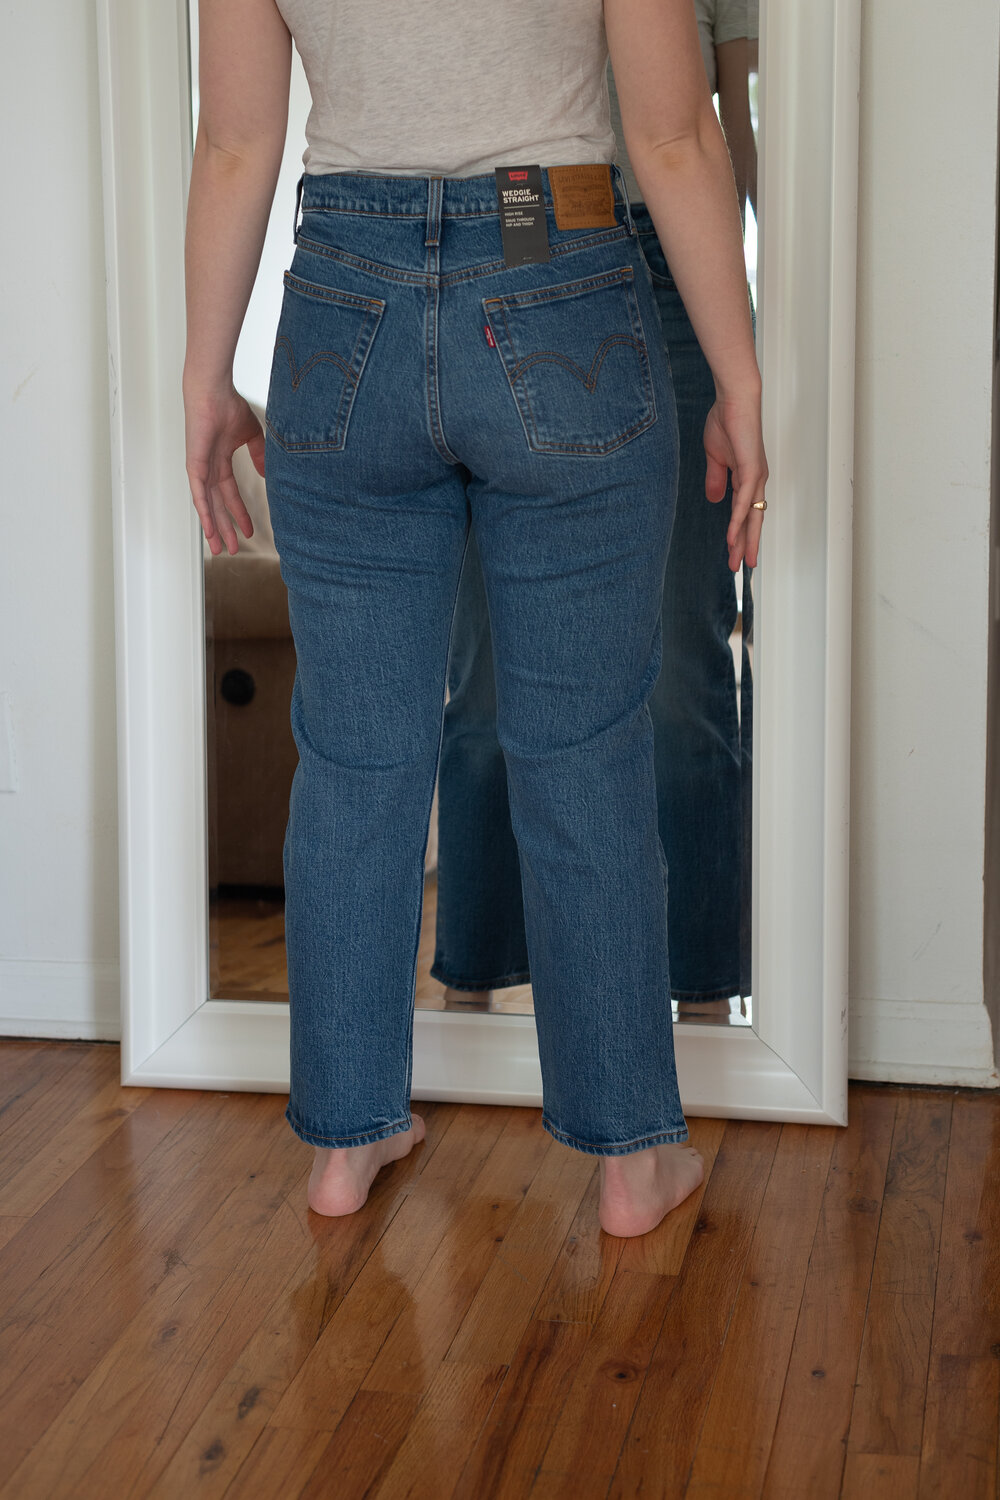 ARE LEVI'S JEANS PETITE PEAR FRIENDLY? — The Petite Pear Project